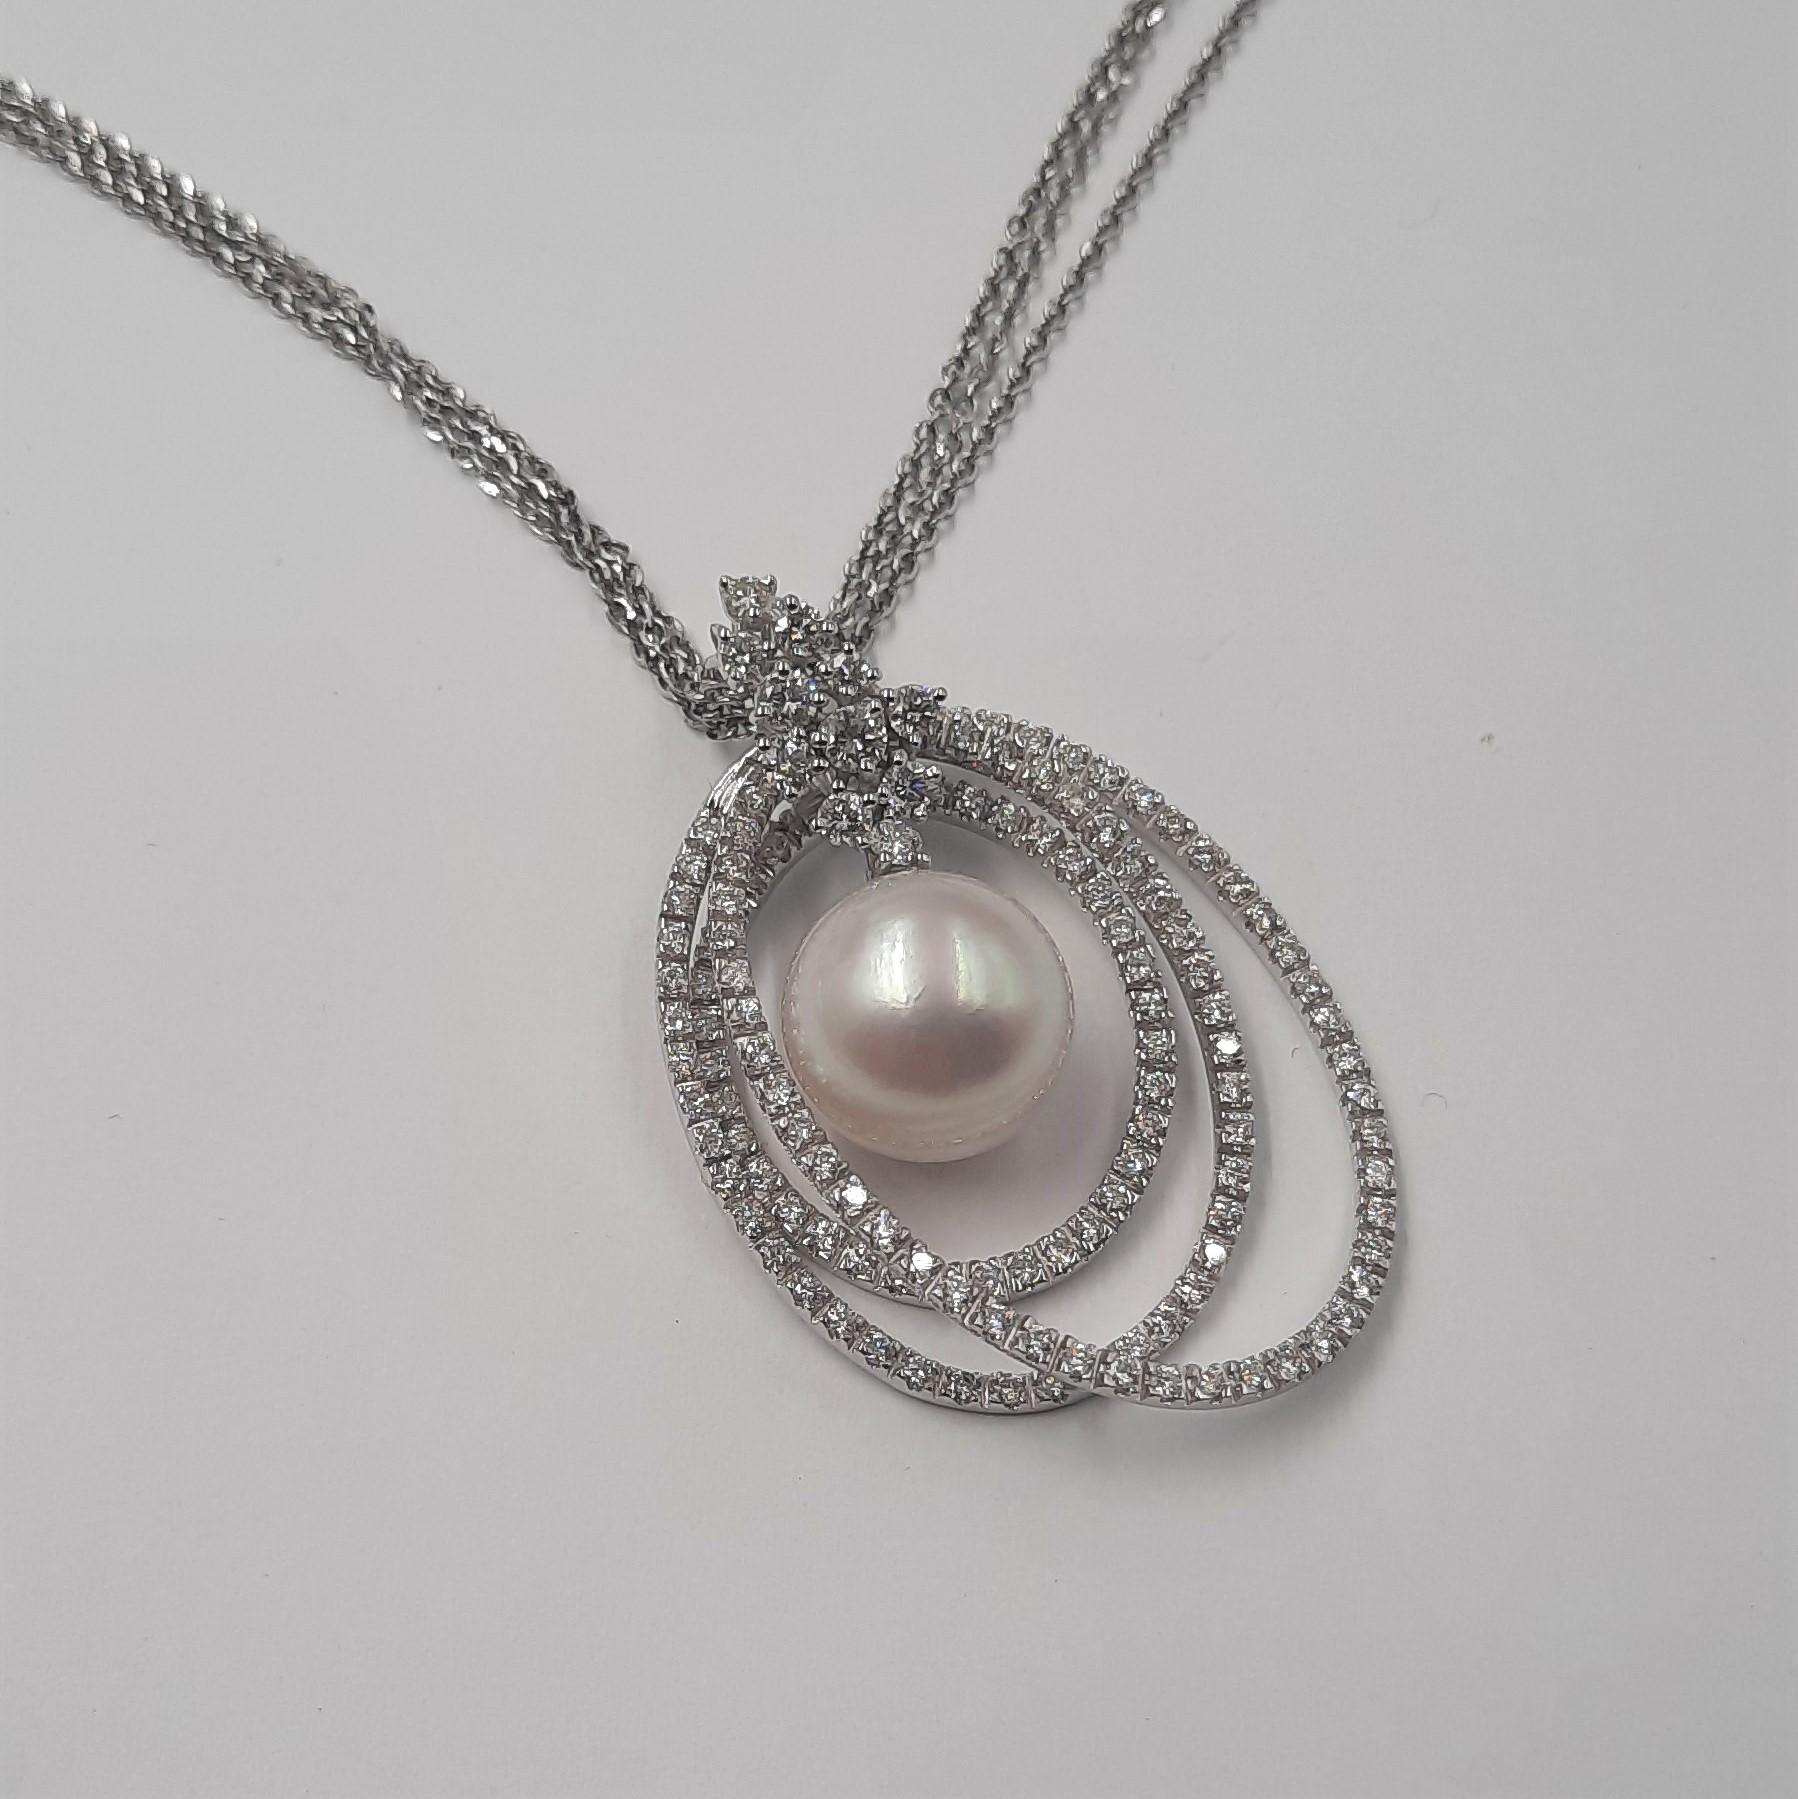 Beautiful Italian brilliant cut diamond (2.57 carats), Australian sea pearl (20.62 carats) and 18 carats white gold (18.8 grams) pendan twith chain. The pendant is eventually part of a set with earrings (see). 